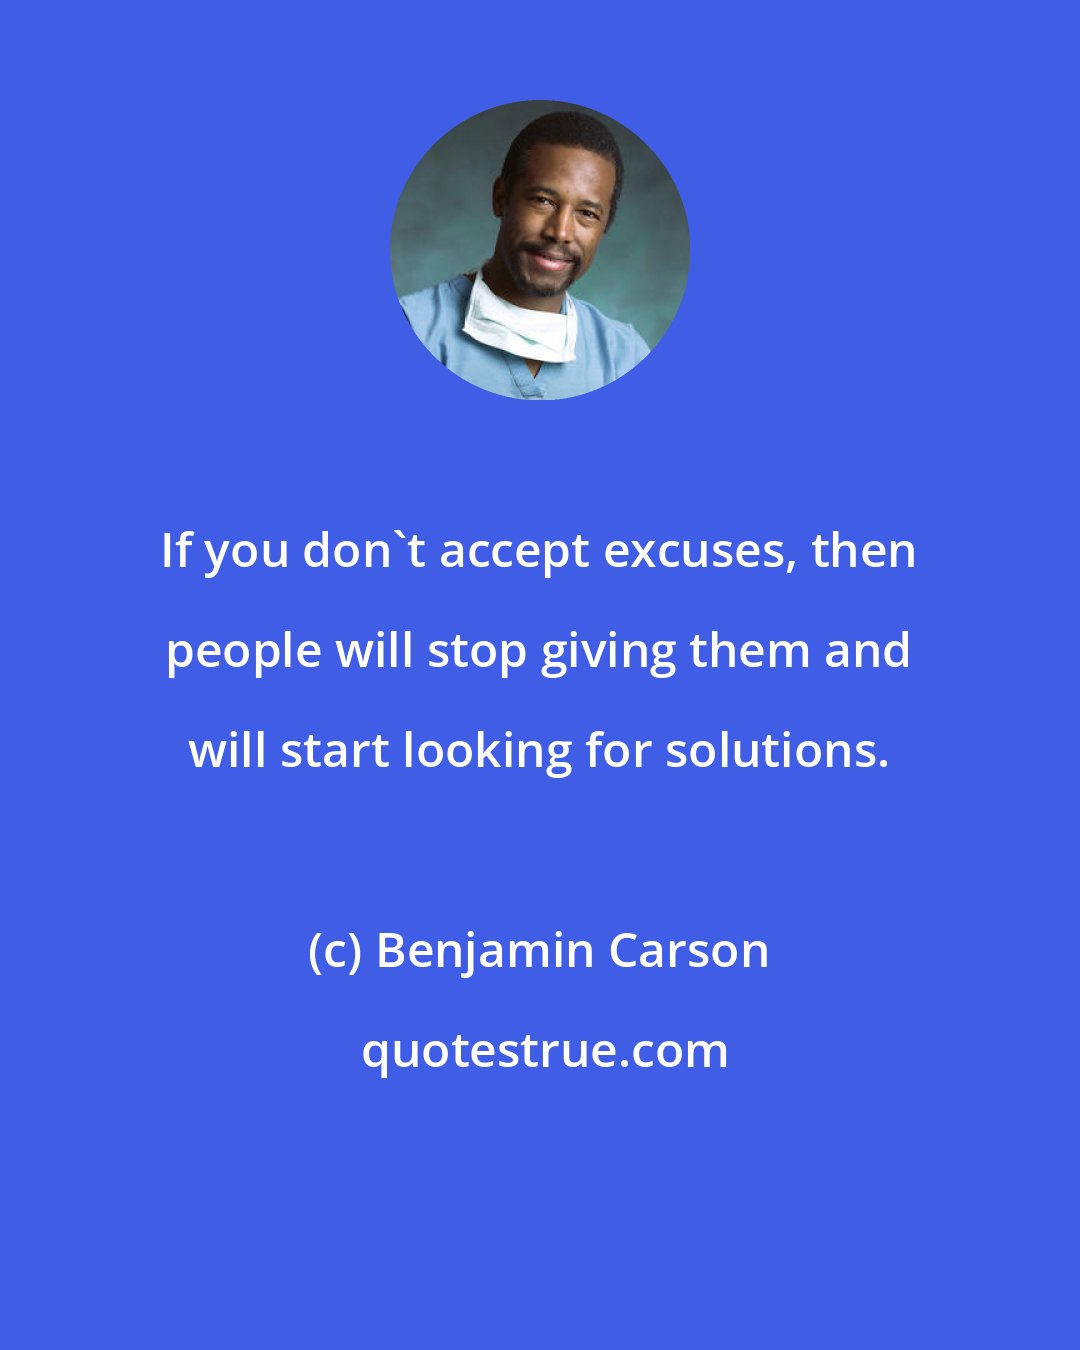 Benjamin Carson: If you don't accept excuses, then people will stop giving them and will start looking for solutions.